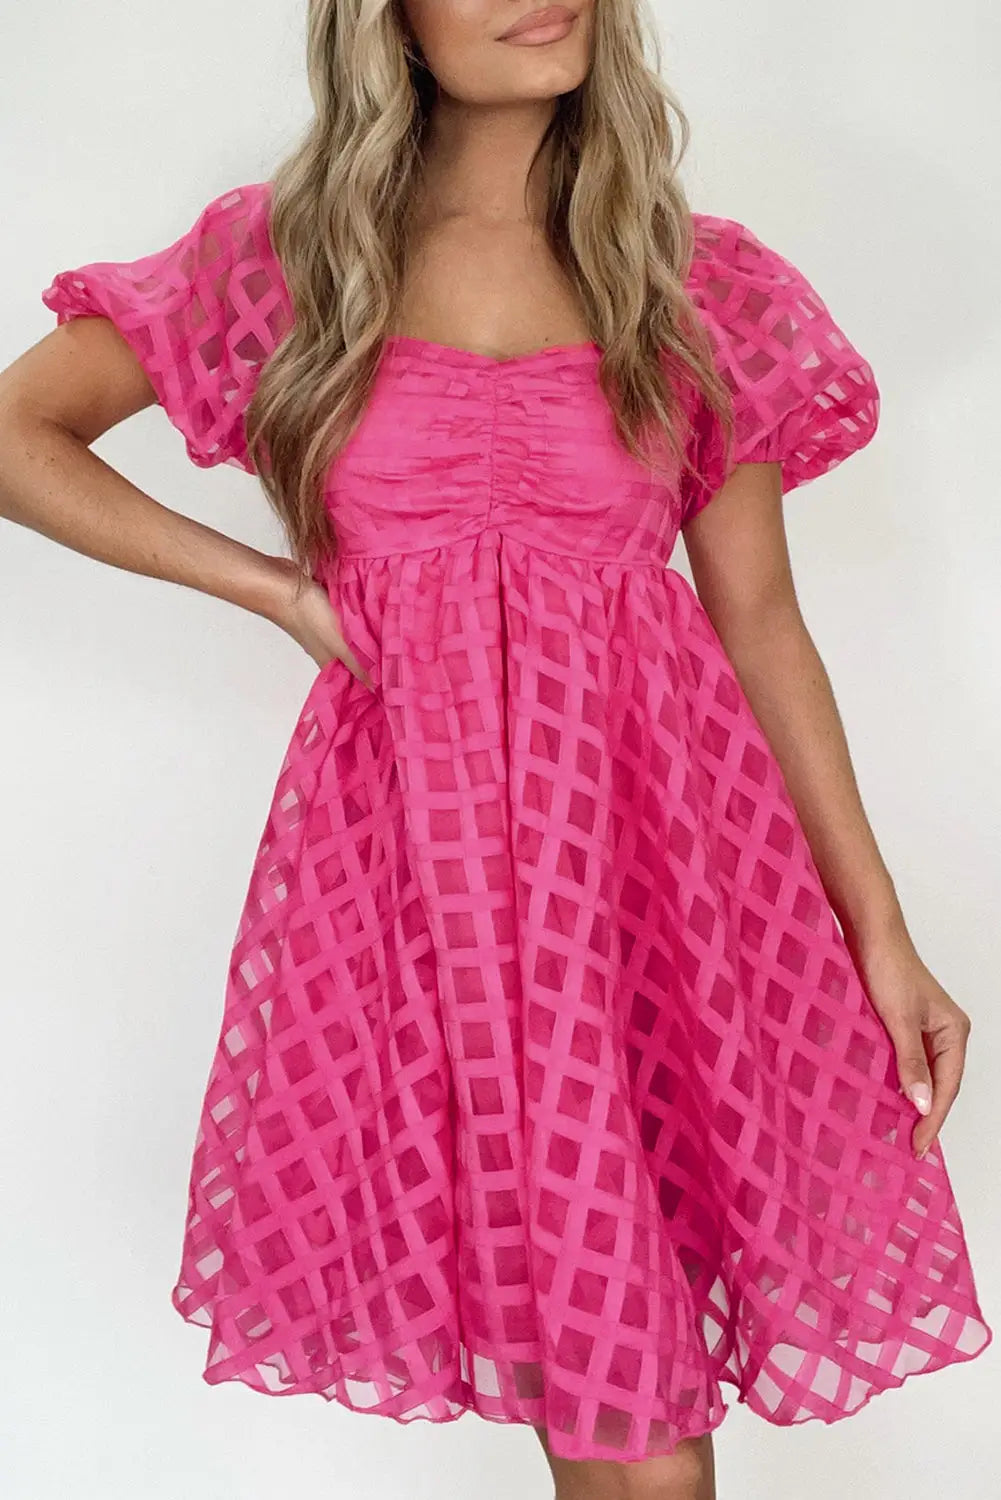 Strawberry pink checkered puff sleeve babydoll dress - s / 100% polyester - dresses